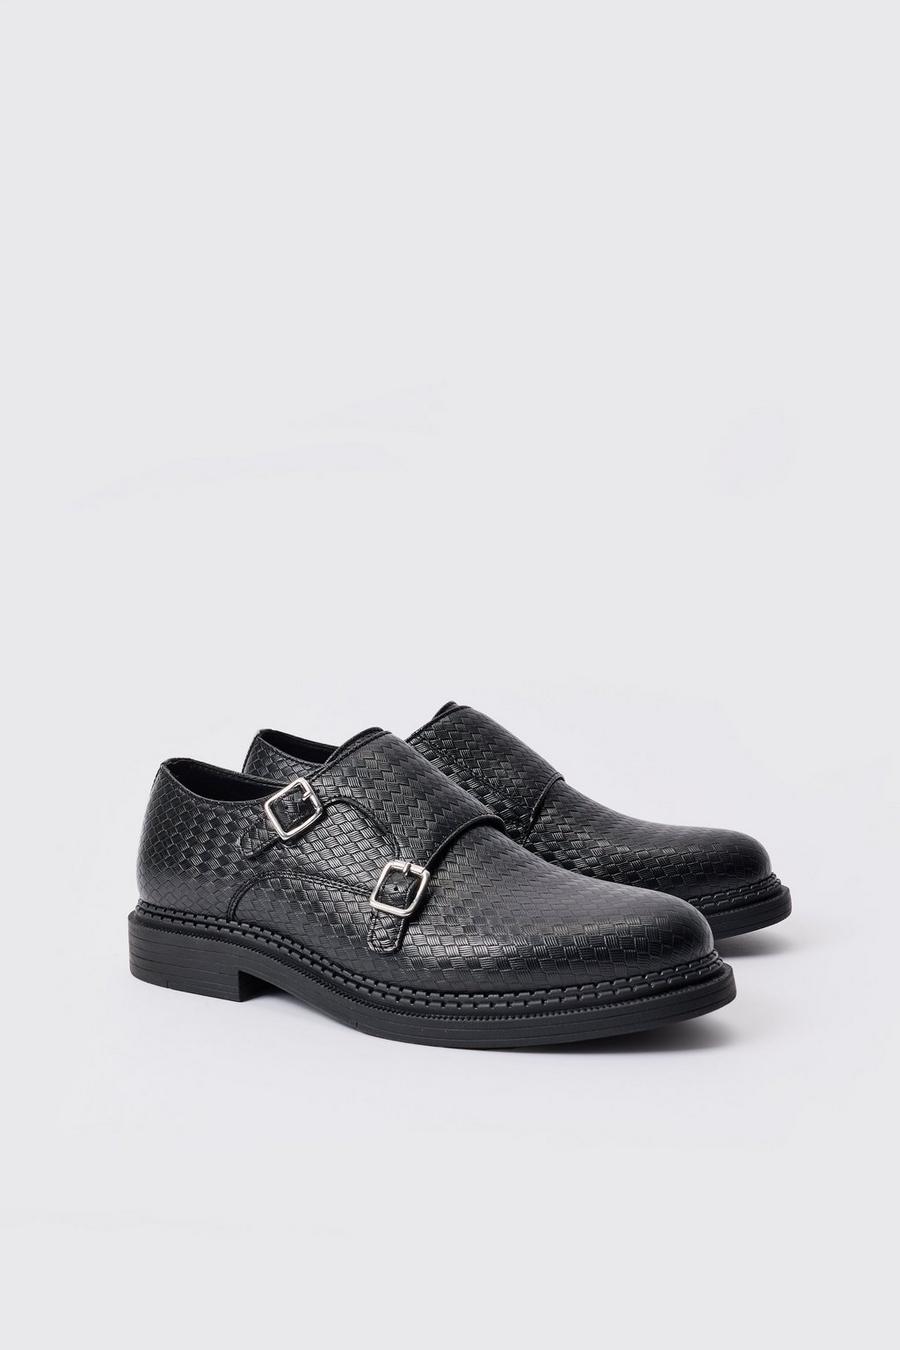 Woven PU Monk Strap Loafer In Black